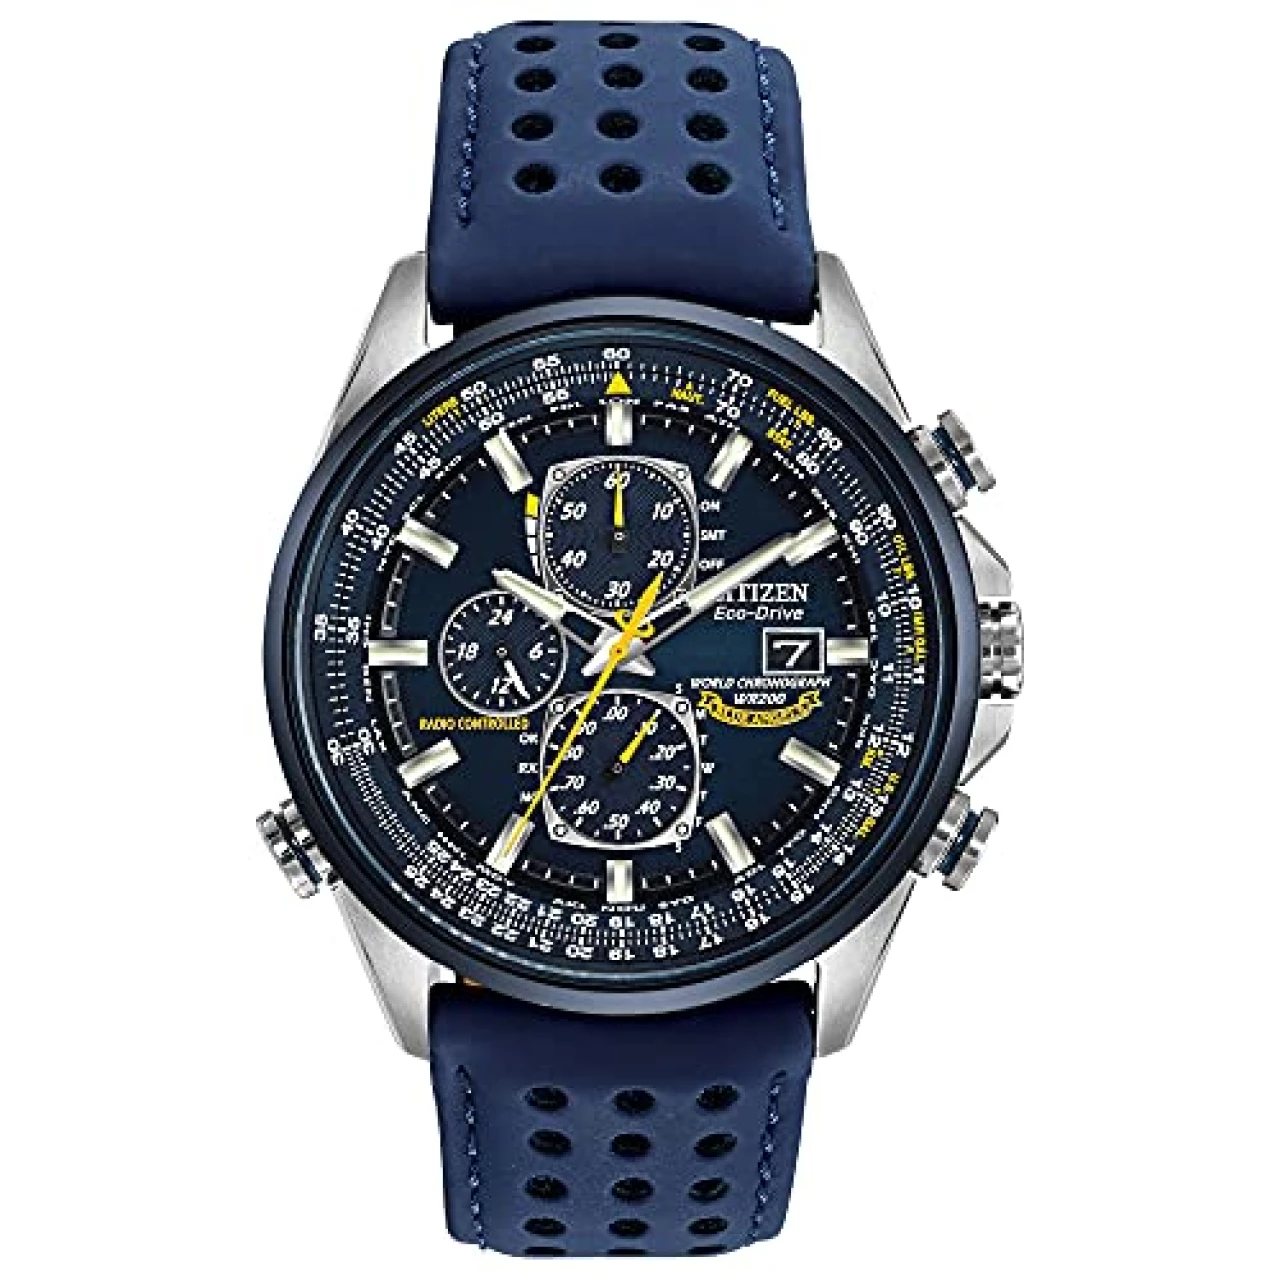 Citizen Men&rsquo;s Eco-Drive Sport Luxury World Chronograph Atomic Time Keeping Watch in Stainless Steel with Blue Polyurethane strap, Blue Dial (Model: AT8020-03L)